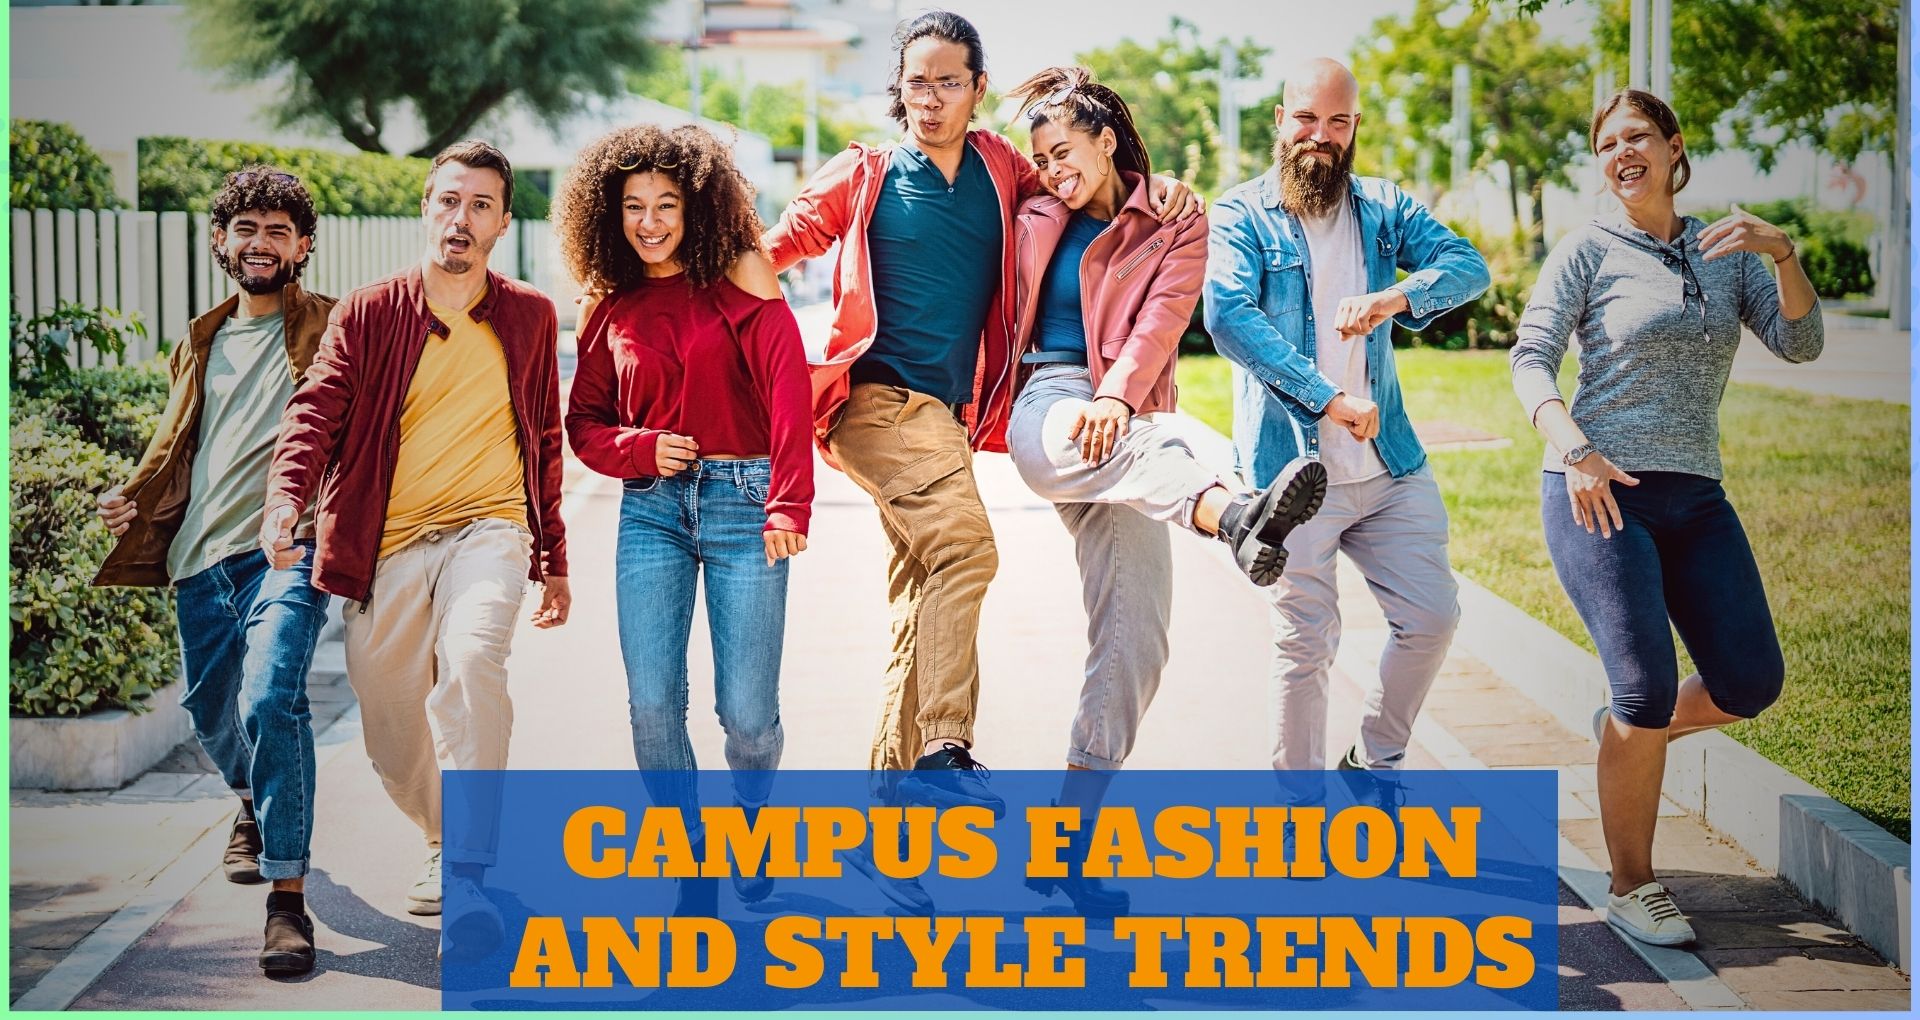 Campus fashion and style trends